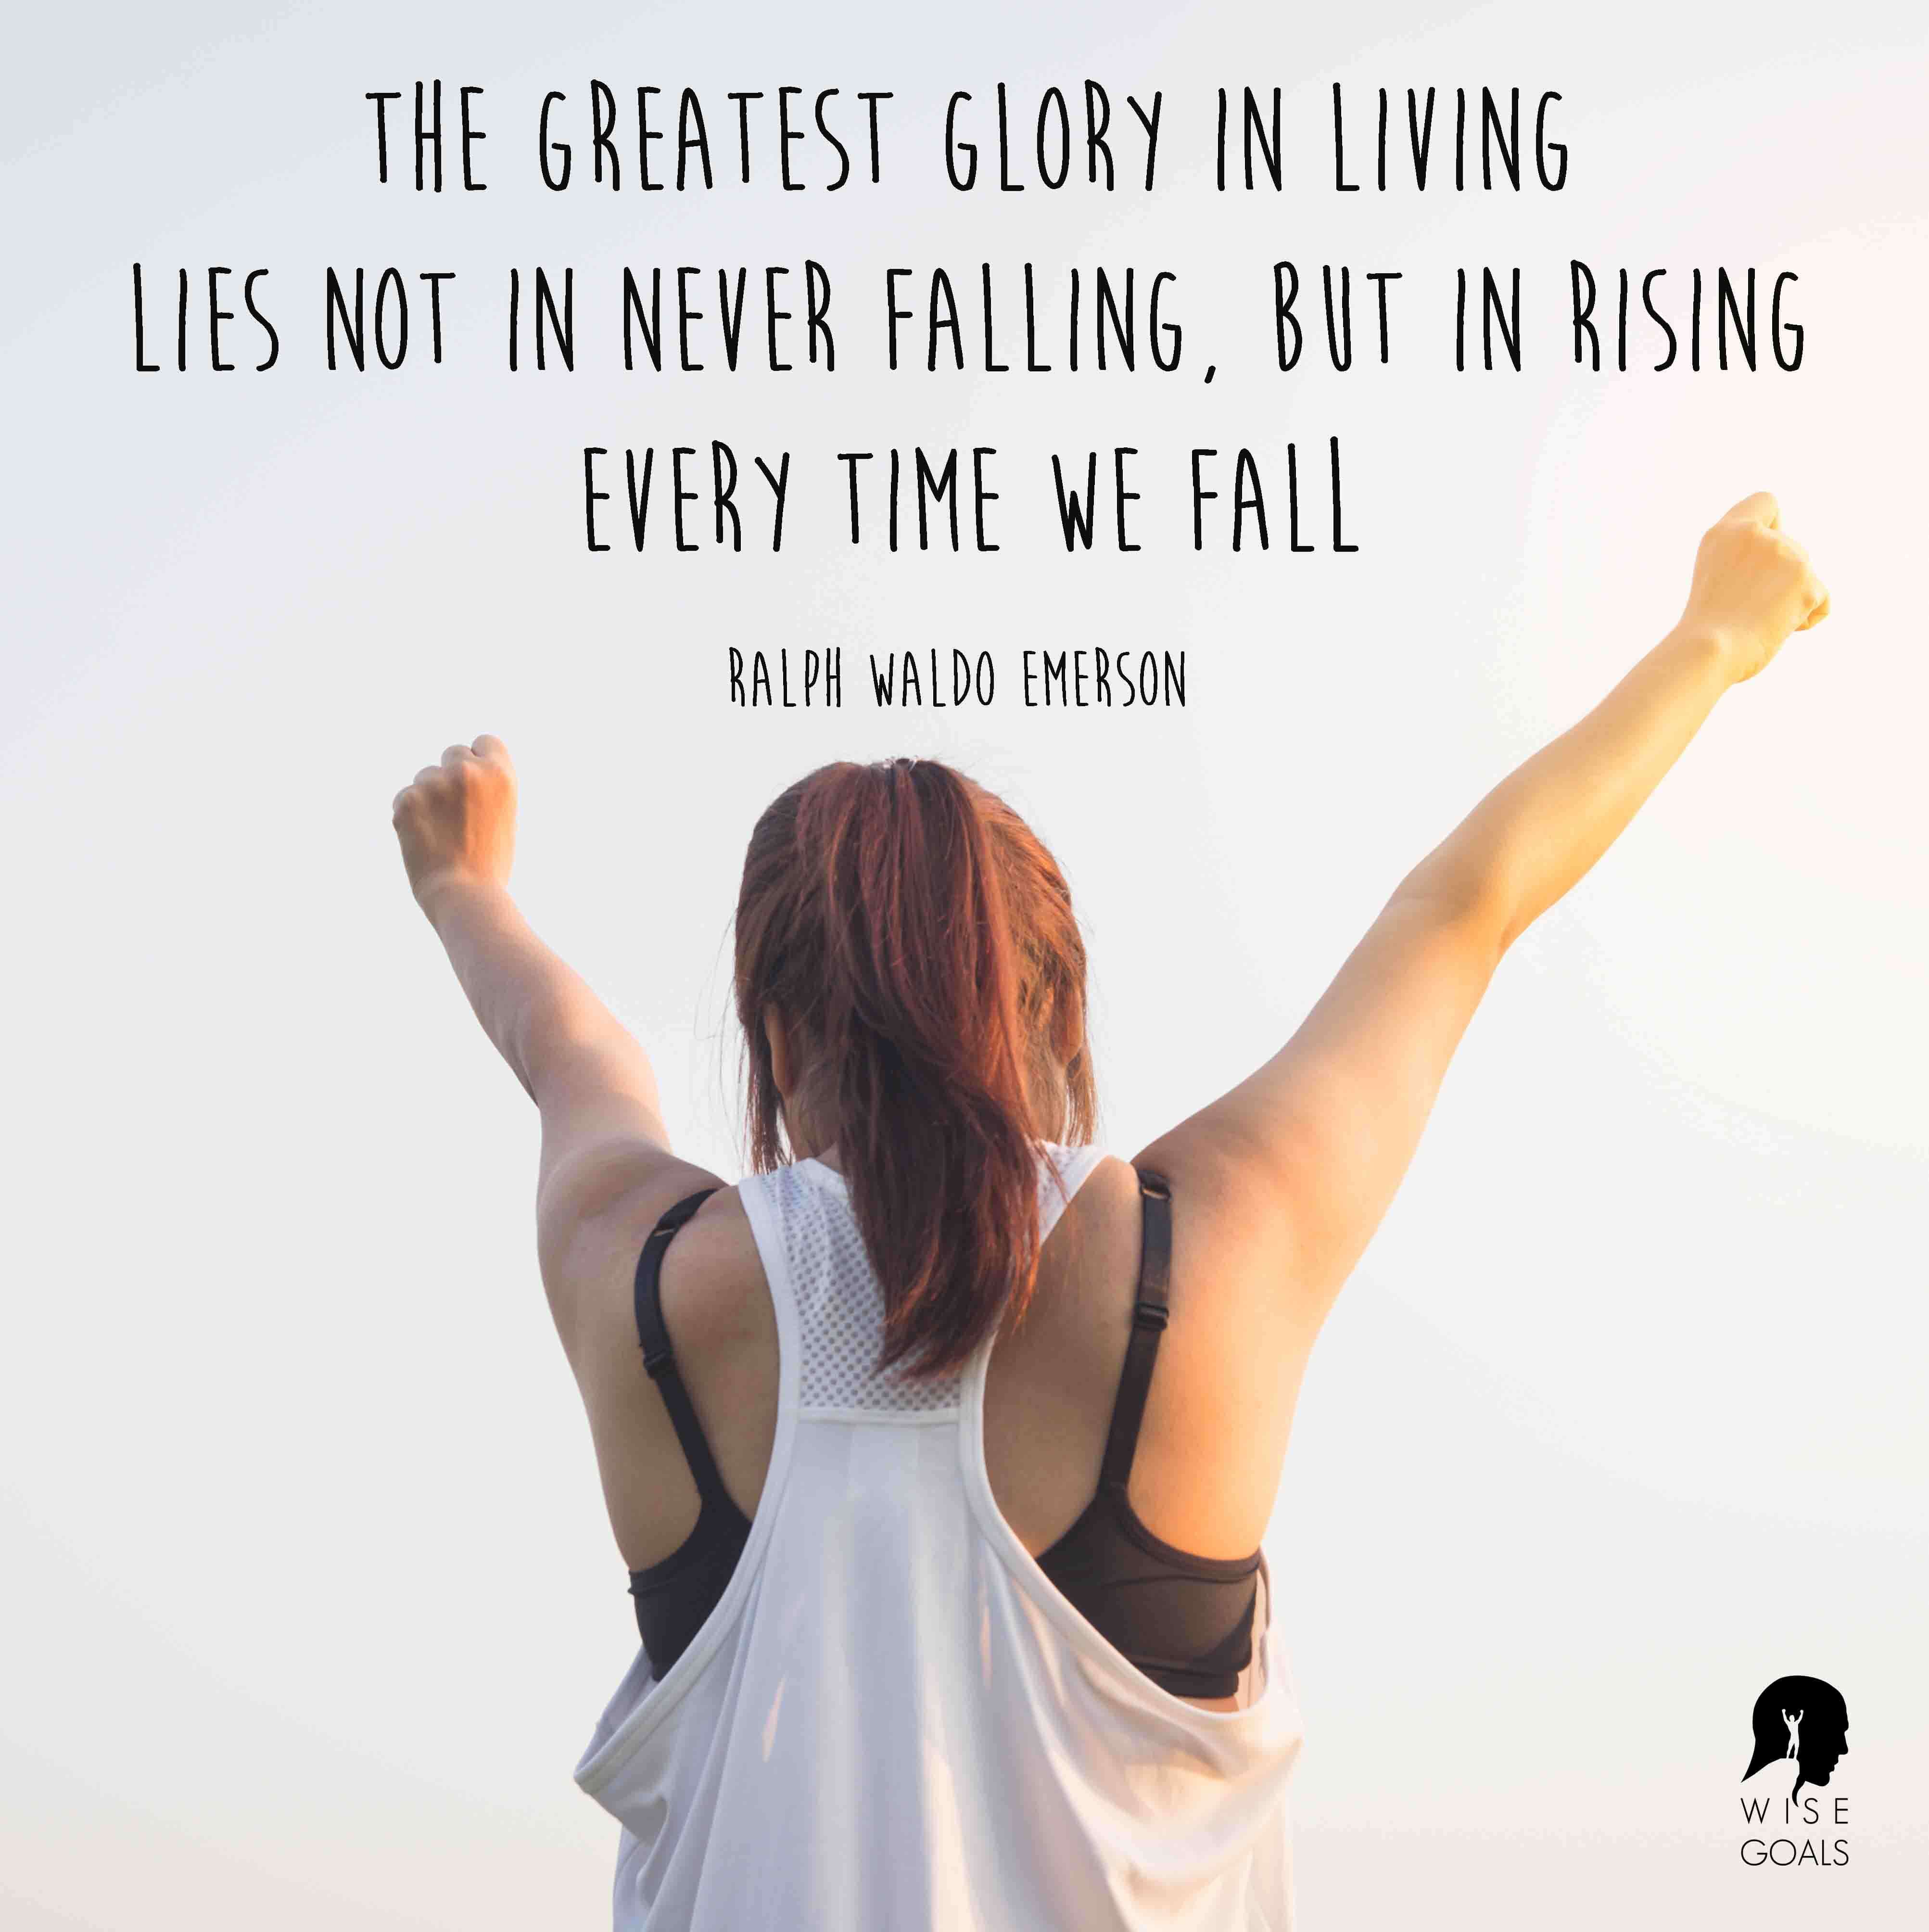 Emerson - The greatest glory in living lies not in never falling, but in rising every time we fall quote 